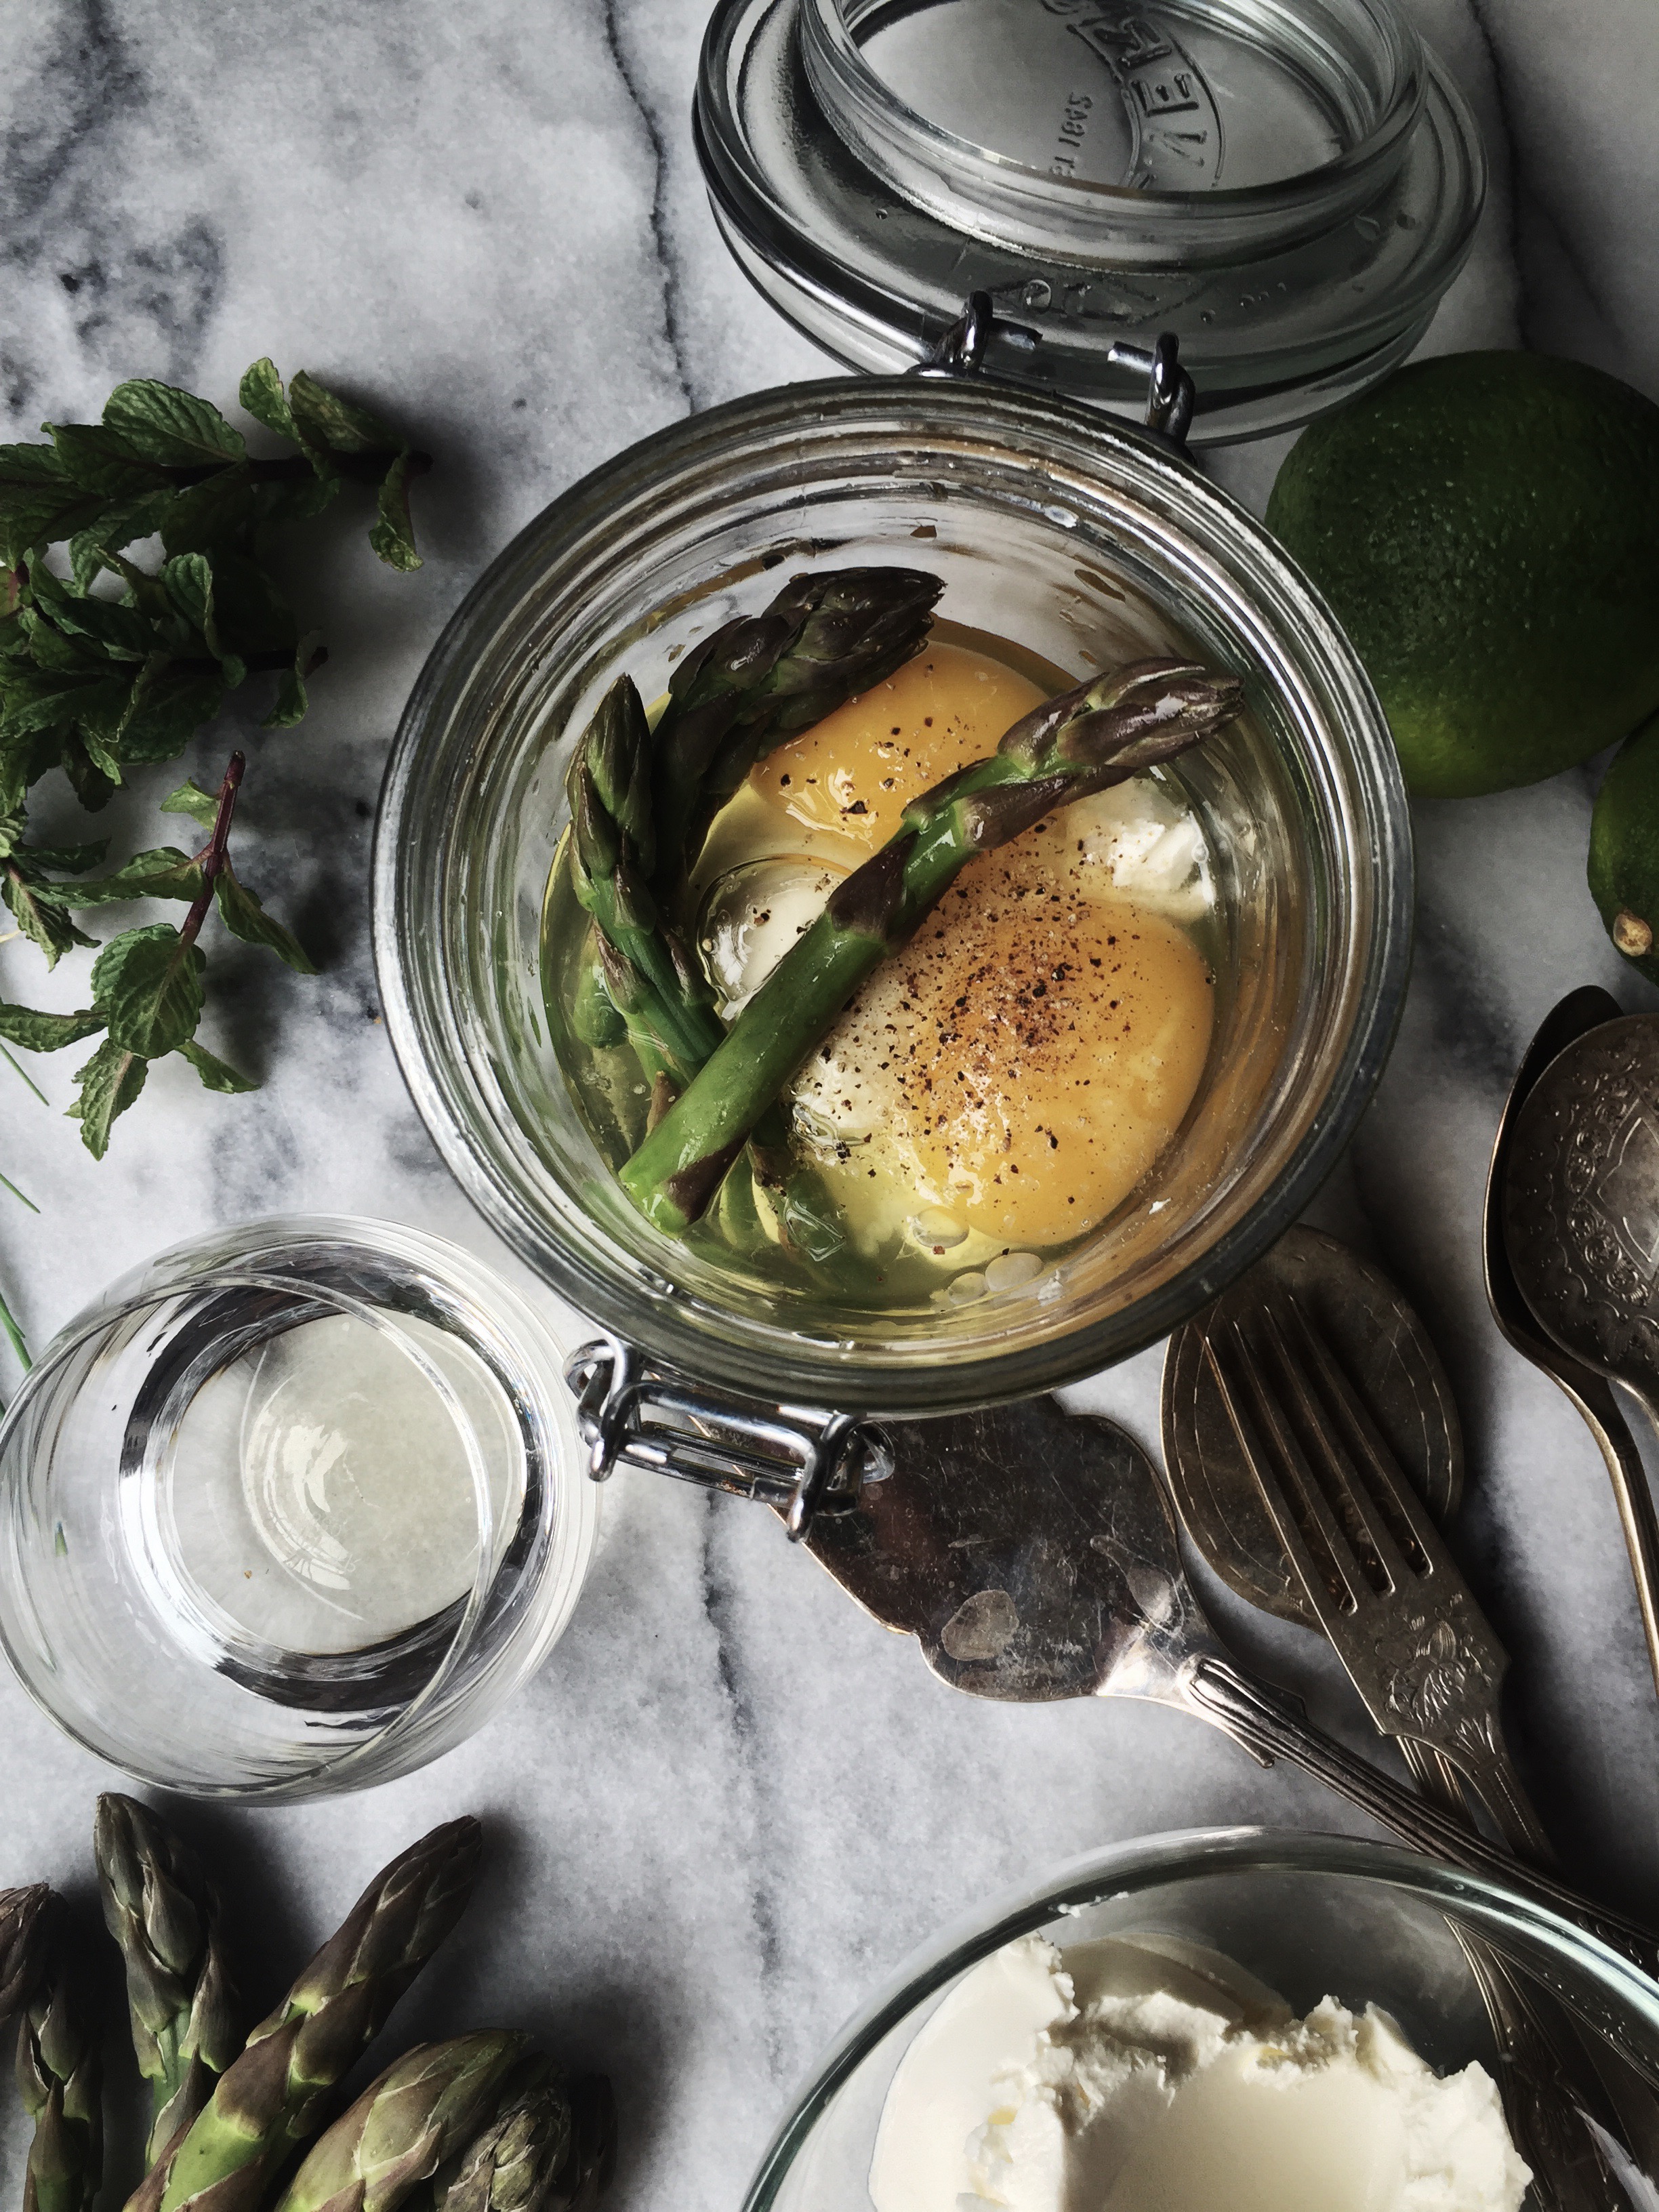 Eggs en cocotte, cooked in a jar, with asparagus and heavy cream